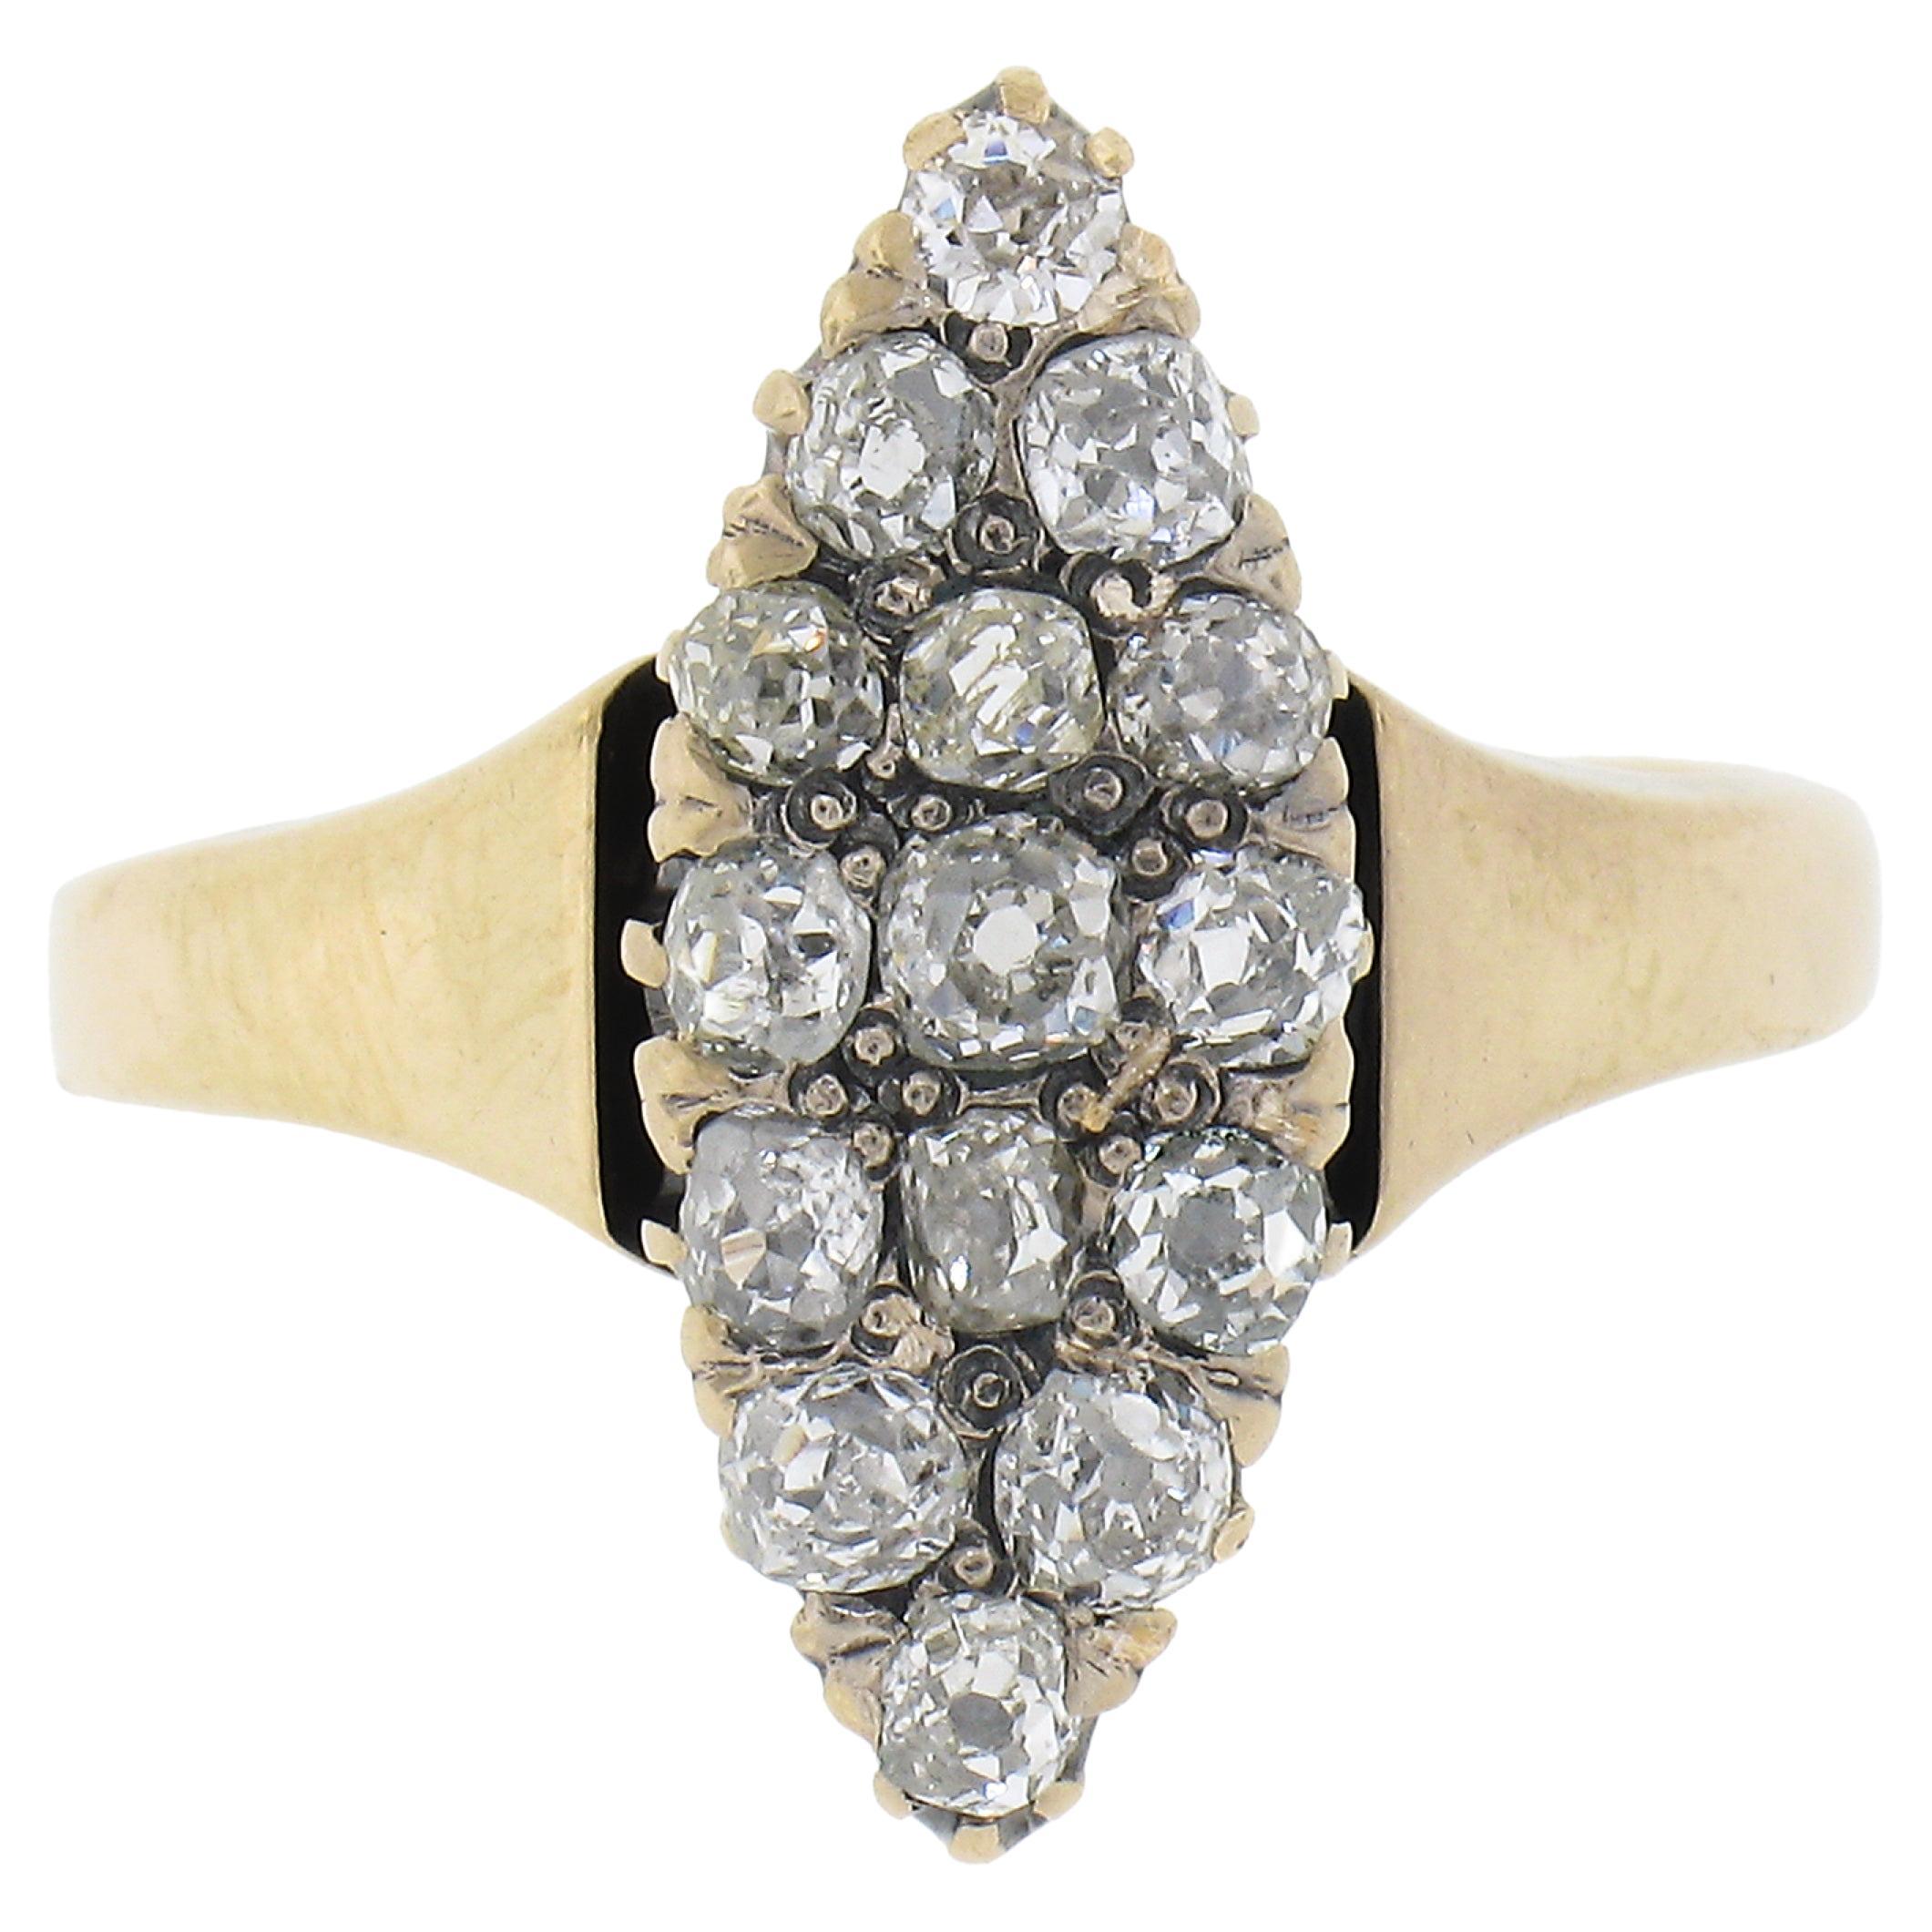 Antique Victorian Gold 1.6ct Old Mine Cut Diamond Navette Marquise Cocktail Ring